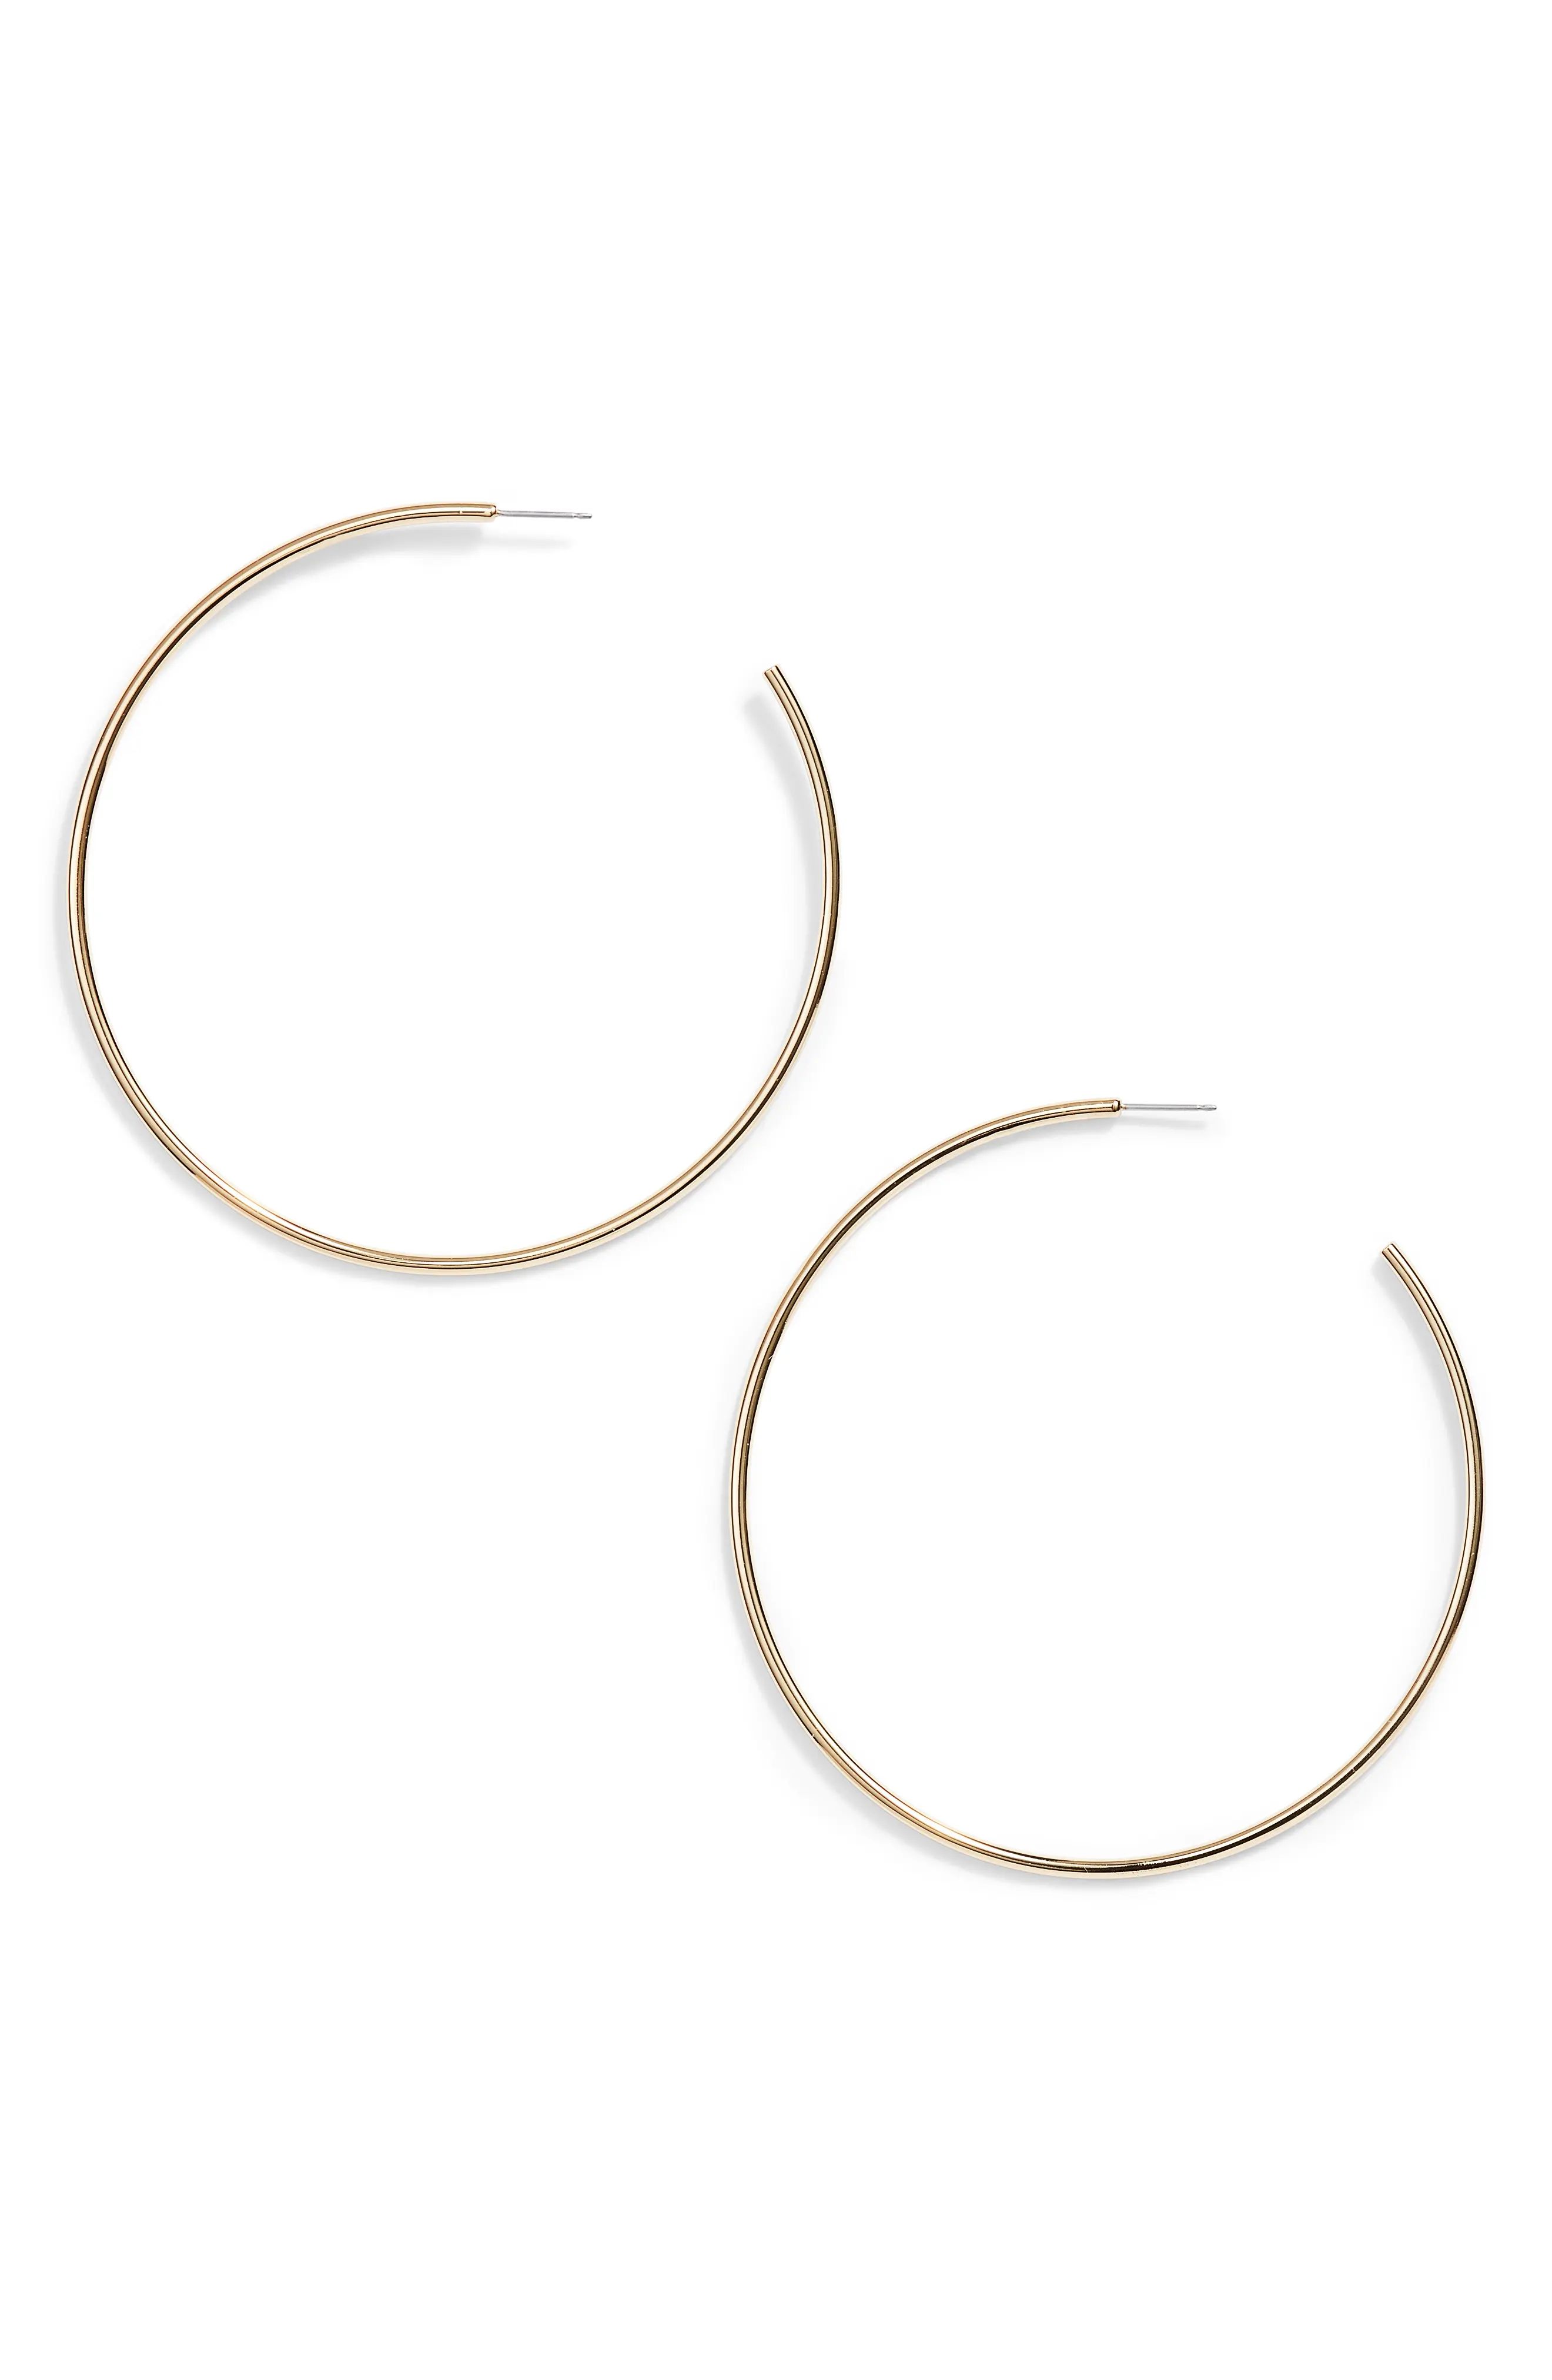 Women's Vince Camuto Thin Gold Hoop Earrings | Nordstrom